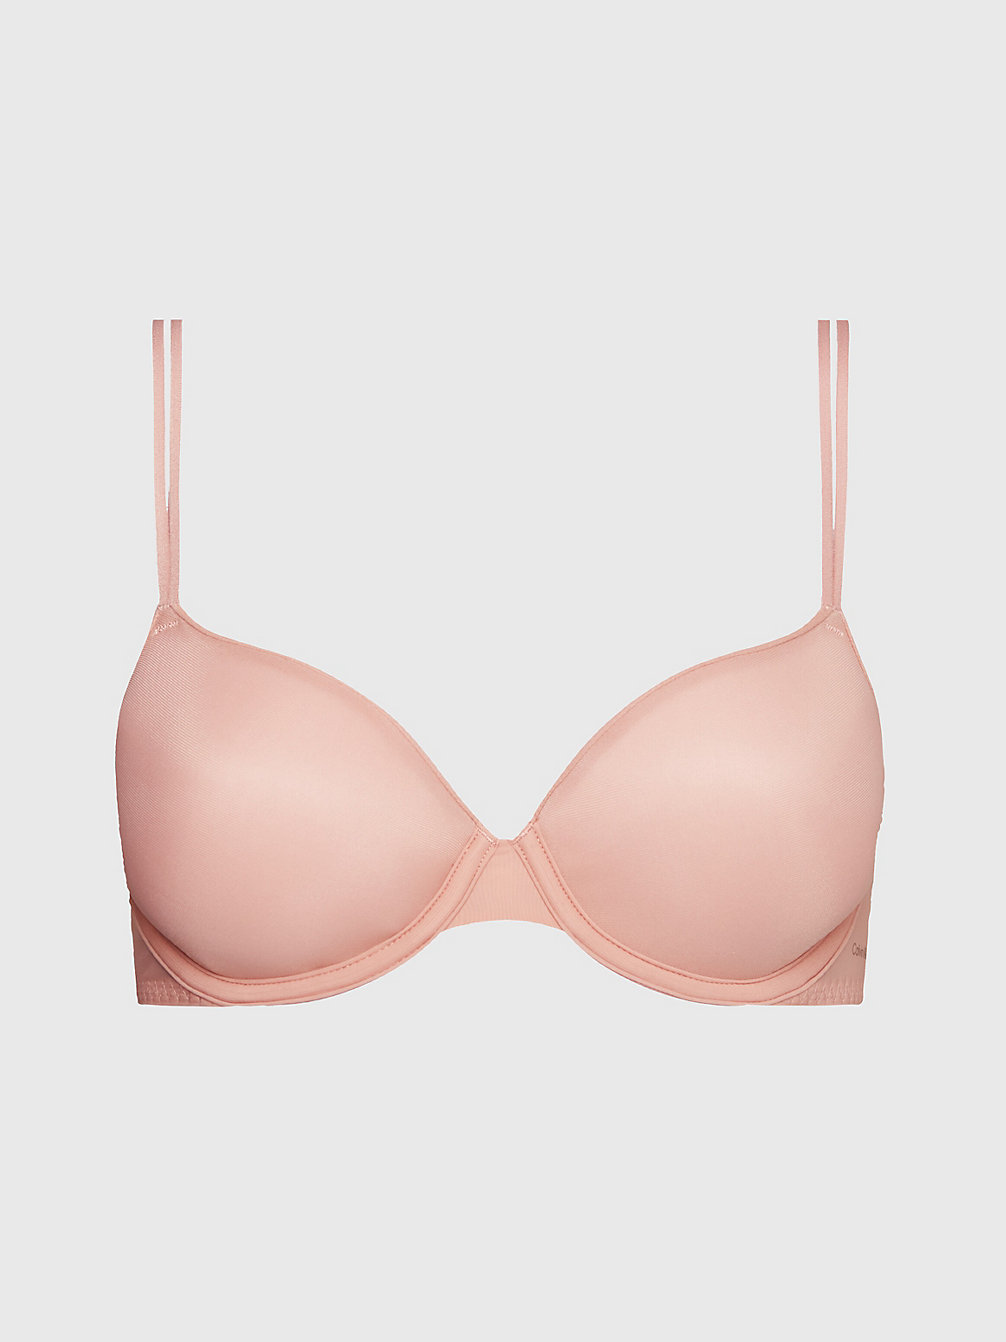 Reggiseno A T-Shirt - Sheer Marquisette > SUBDUED > undefined donna > Calvin Klein